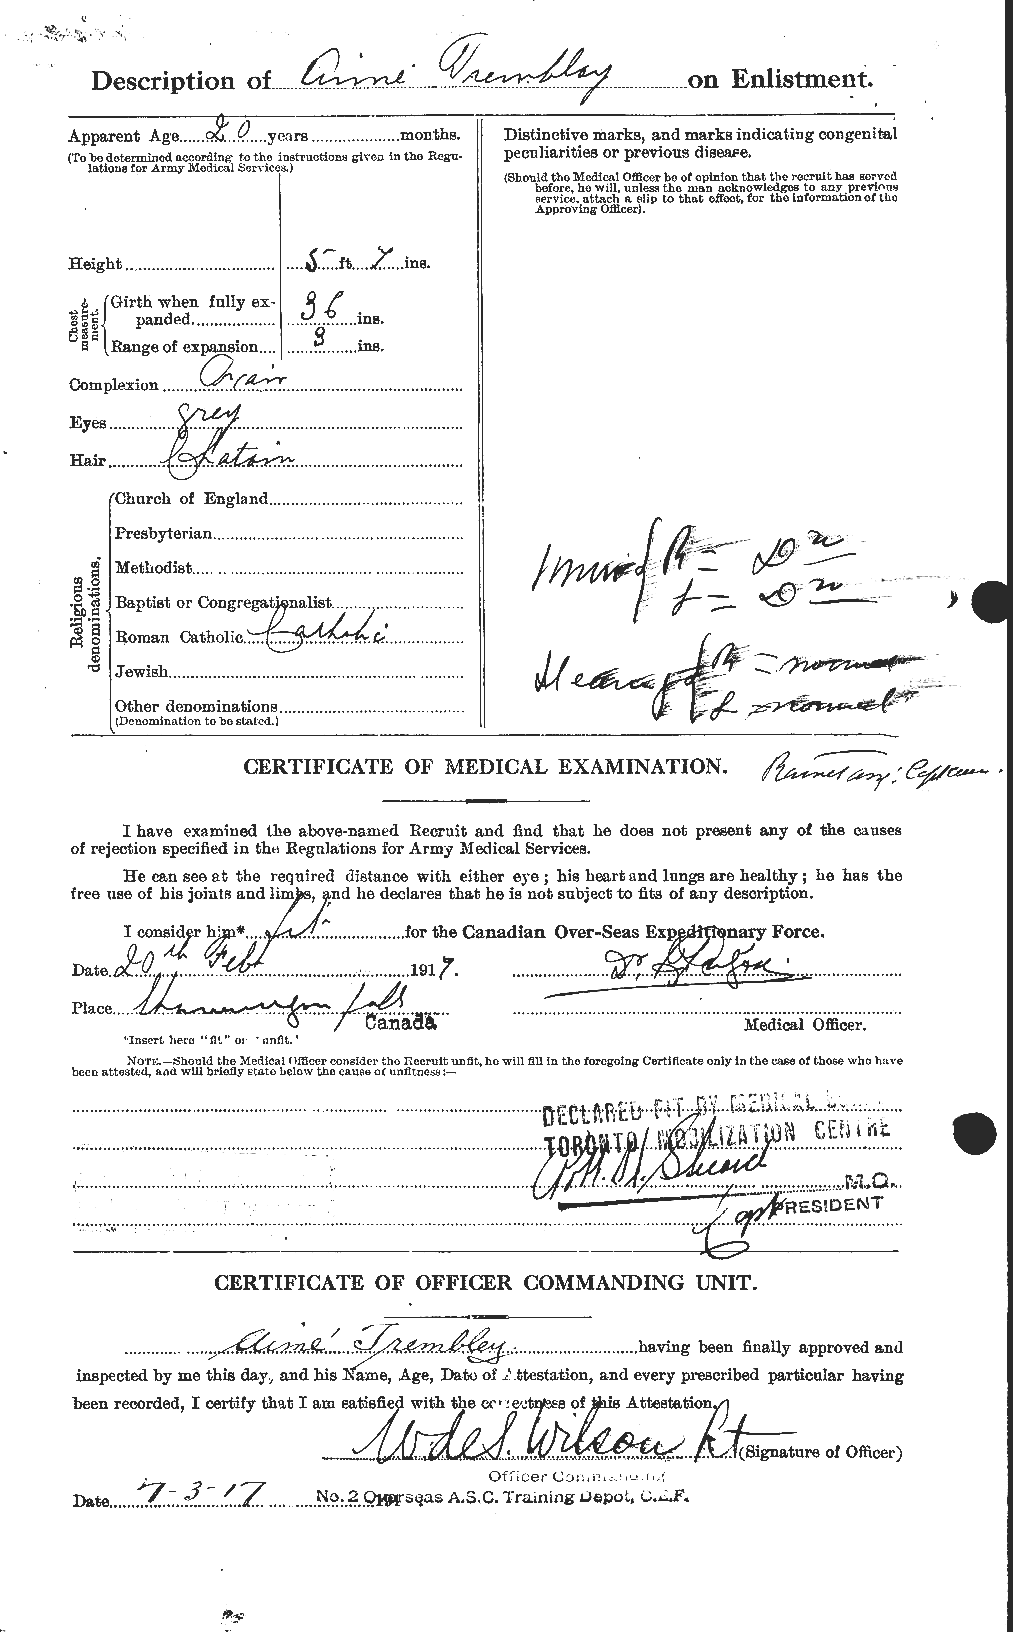 Personnel Records of the First World War - CEF 637568b